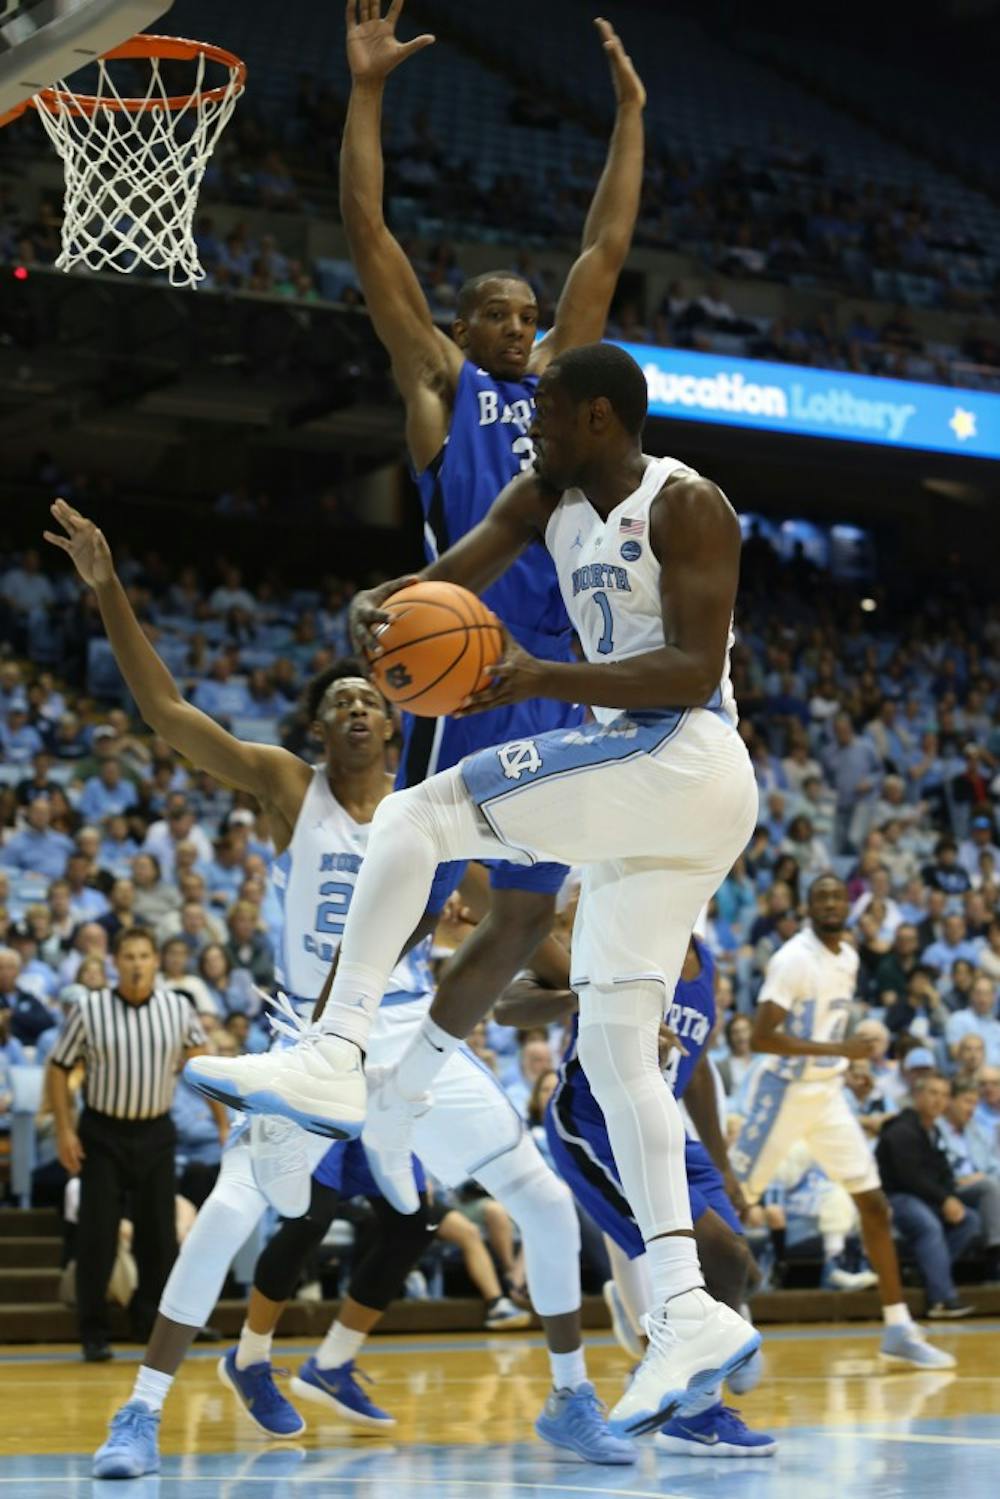 <p>Forward Theo Pinson (1) drops off a pass for forward Sterling Manley (21) against Barton College on Friday night in the Smith Center.&nbsp;</p>